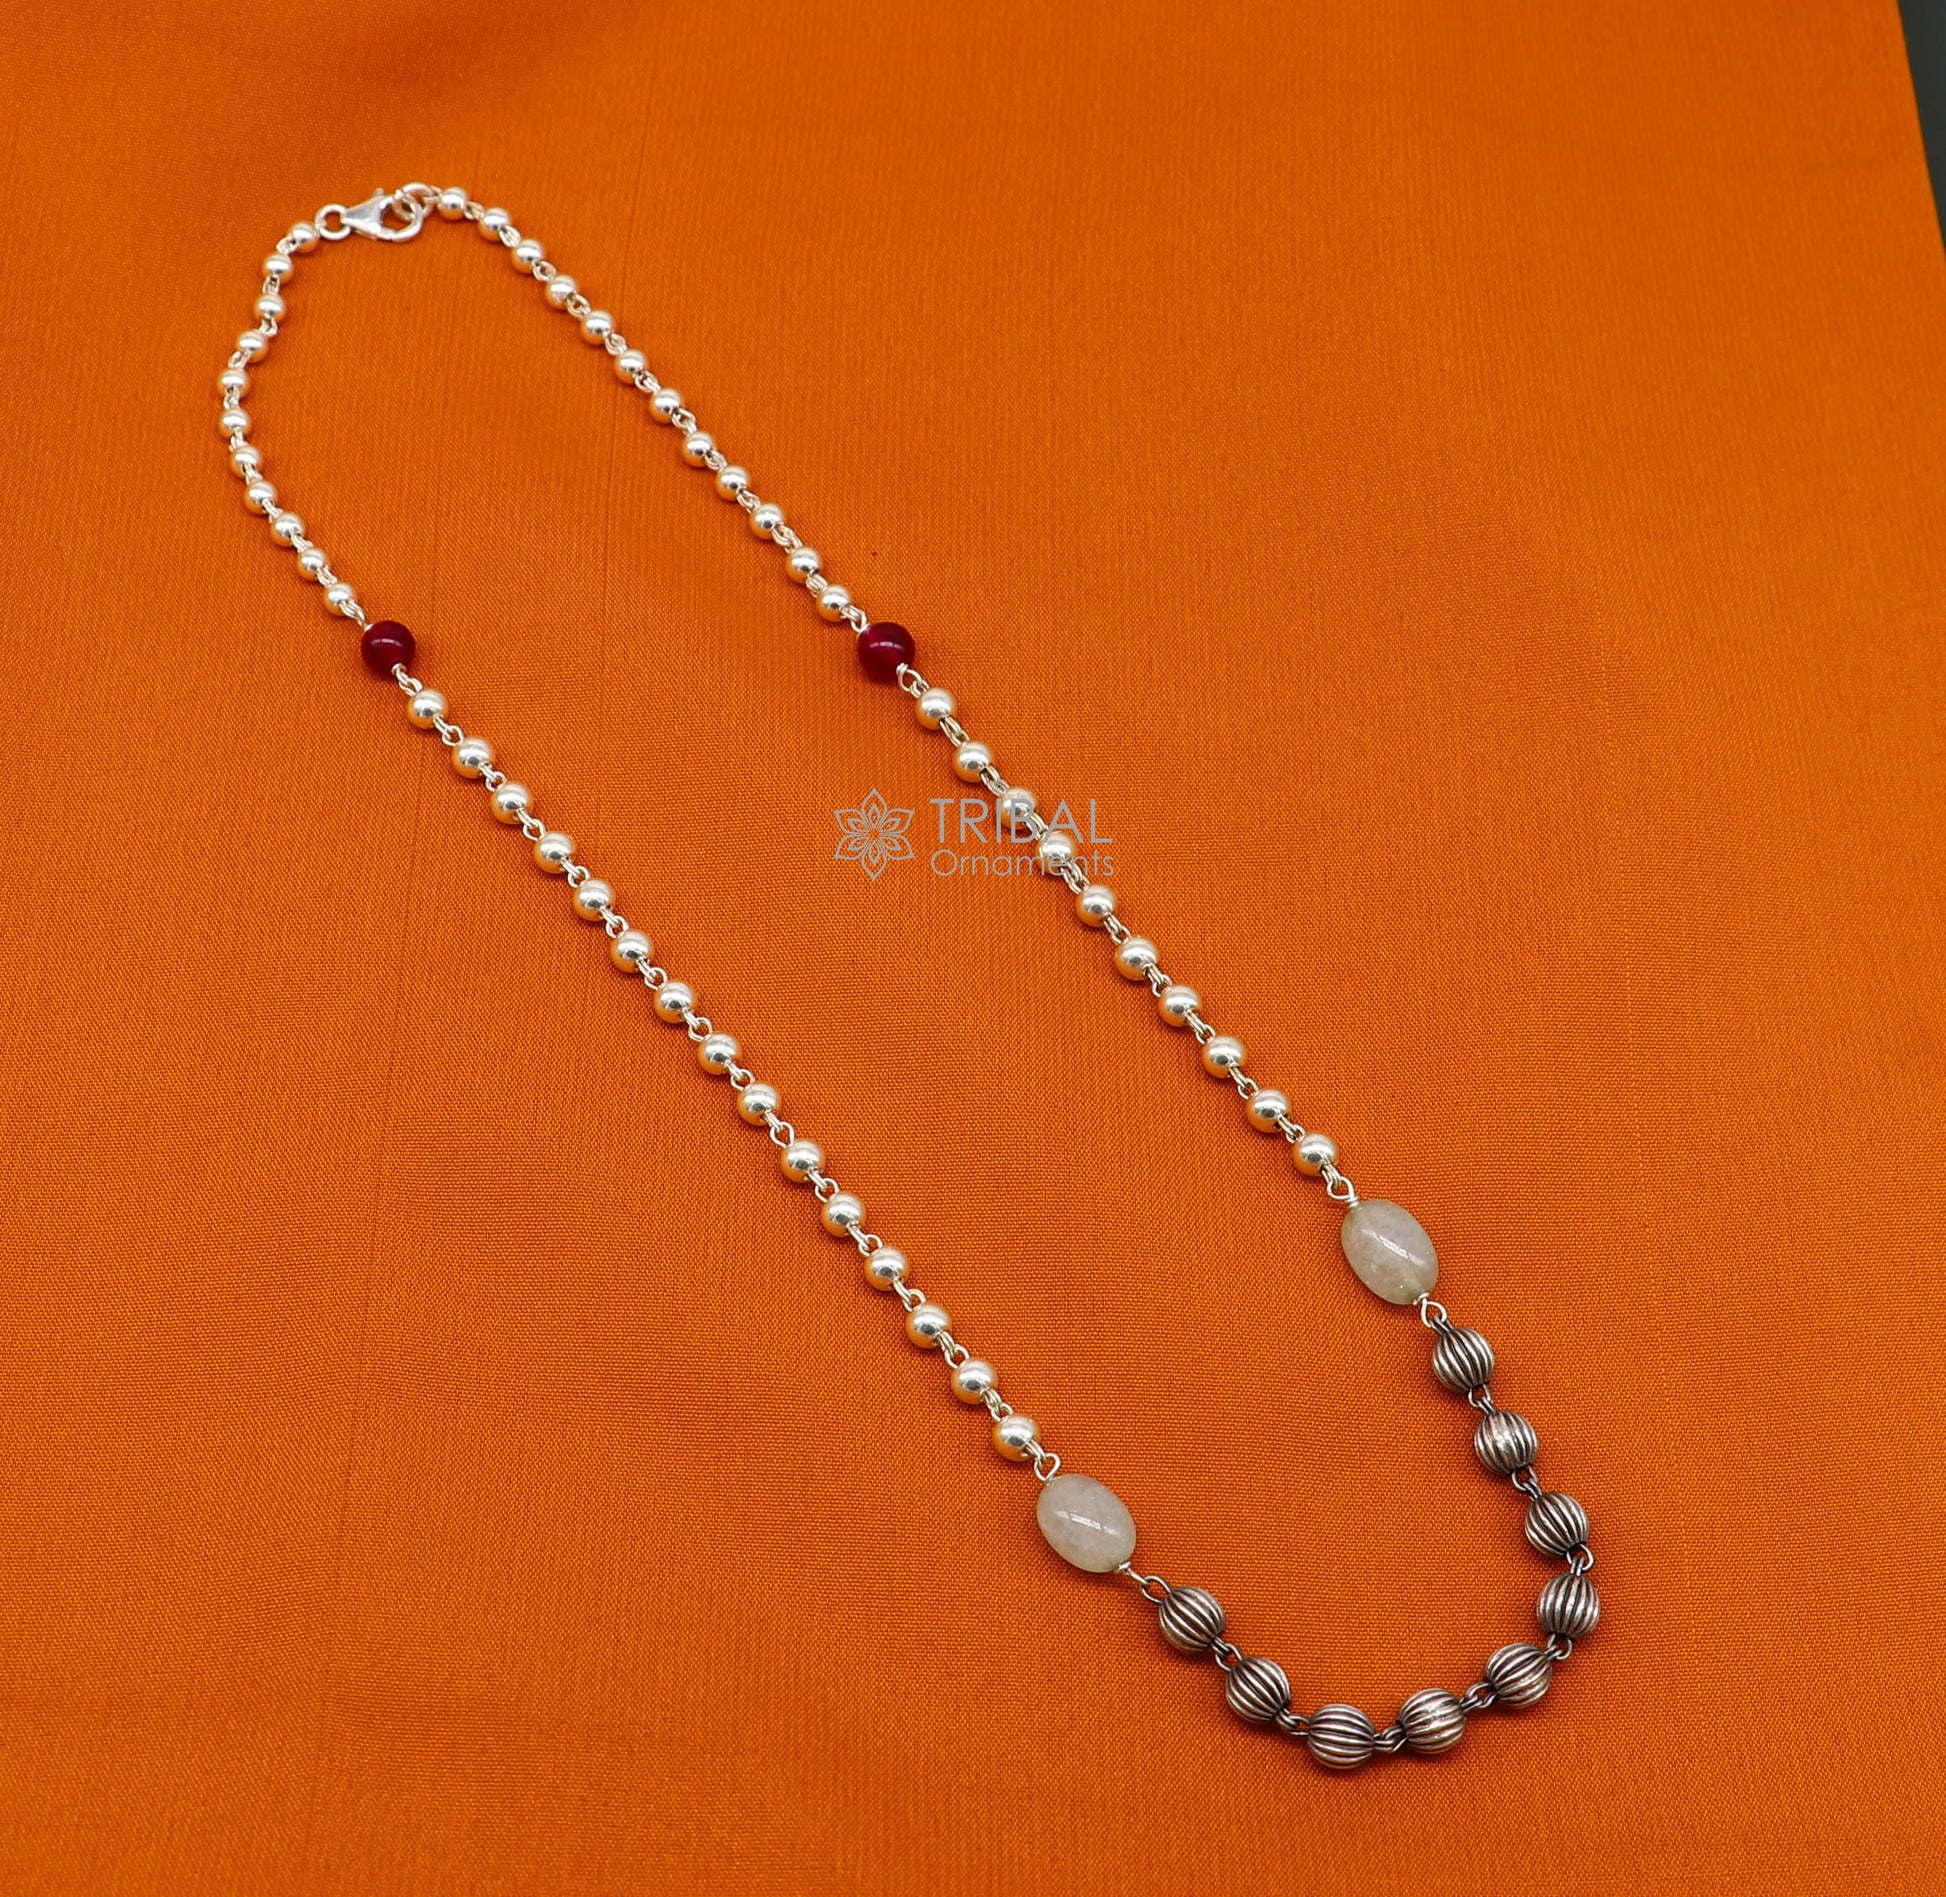 16" to 30" 925 sterling silver customized stylish beaded chain necklace, excellent gifting modern trendy necklace tribal jewelry ch248 - TRIBAL ORNAMENTS